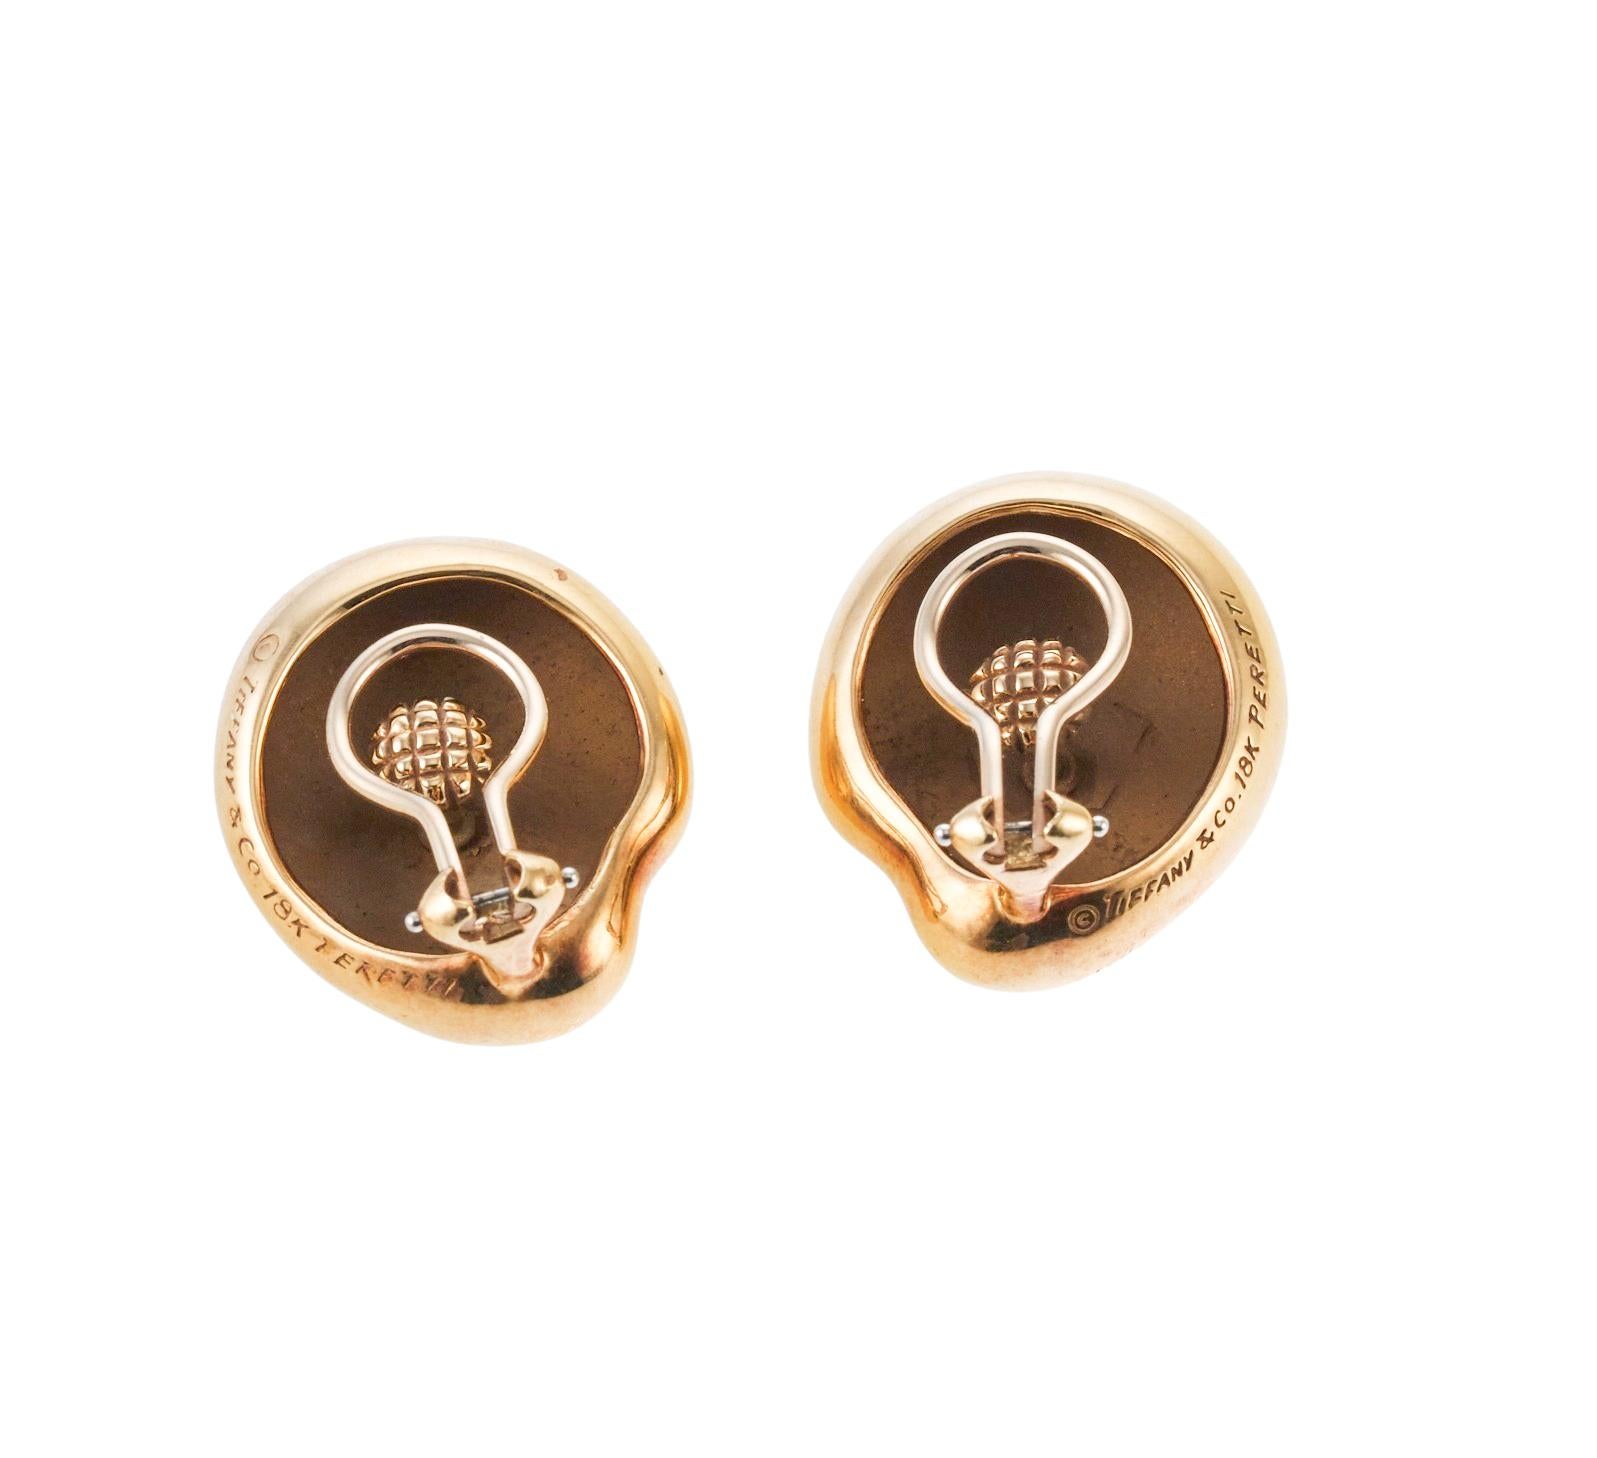 Tiffany & Co Elsa Peretti Gold Large Bean Earrings In Excellent Condition For Sale In New York, NY